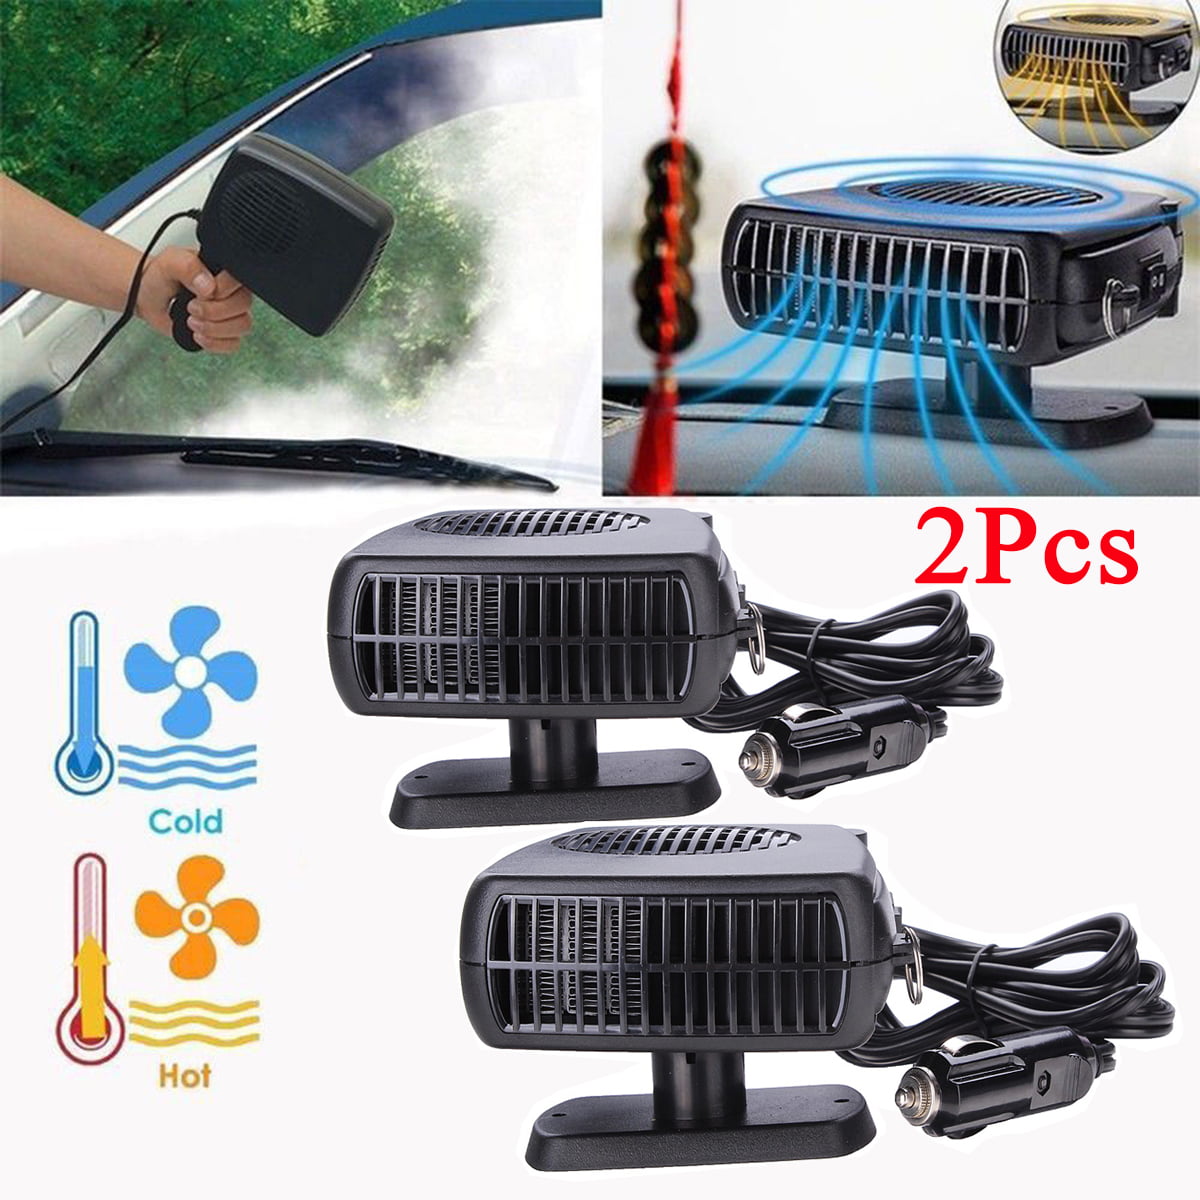 New Car Portable Ceramic Heater 12V Heating Cooling Fan Demister Defroster auto 